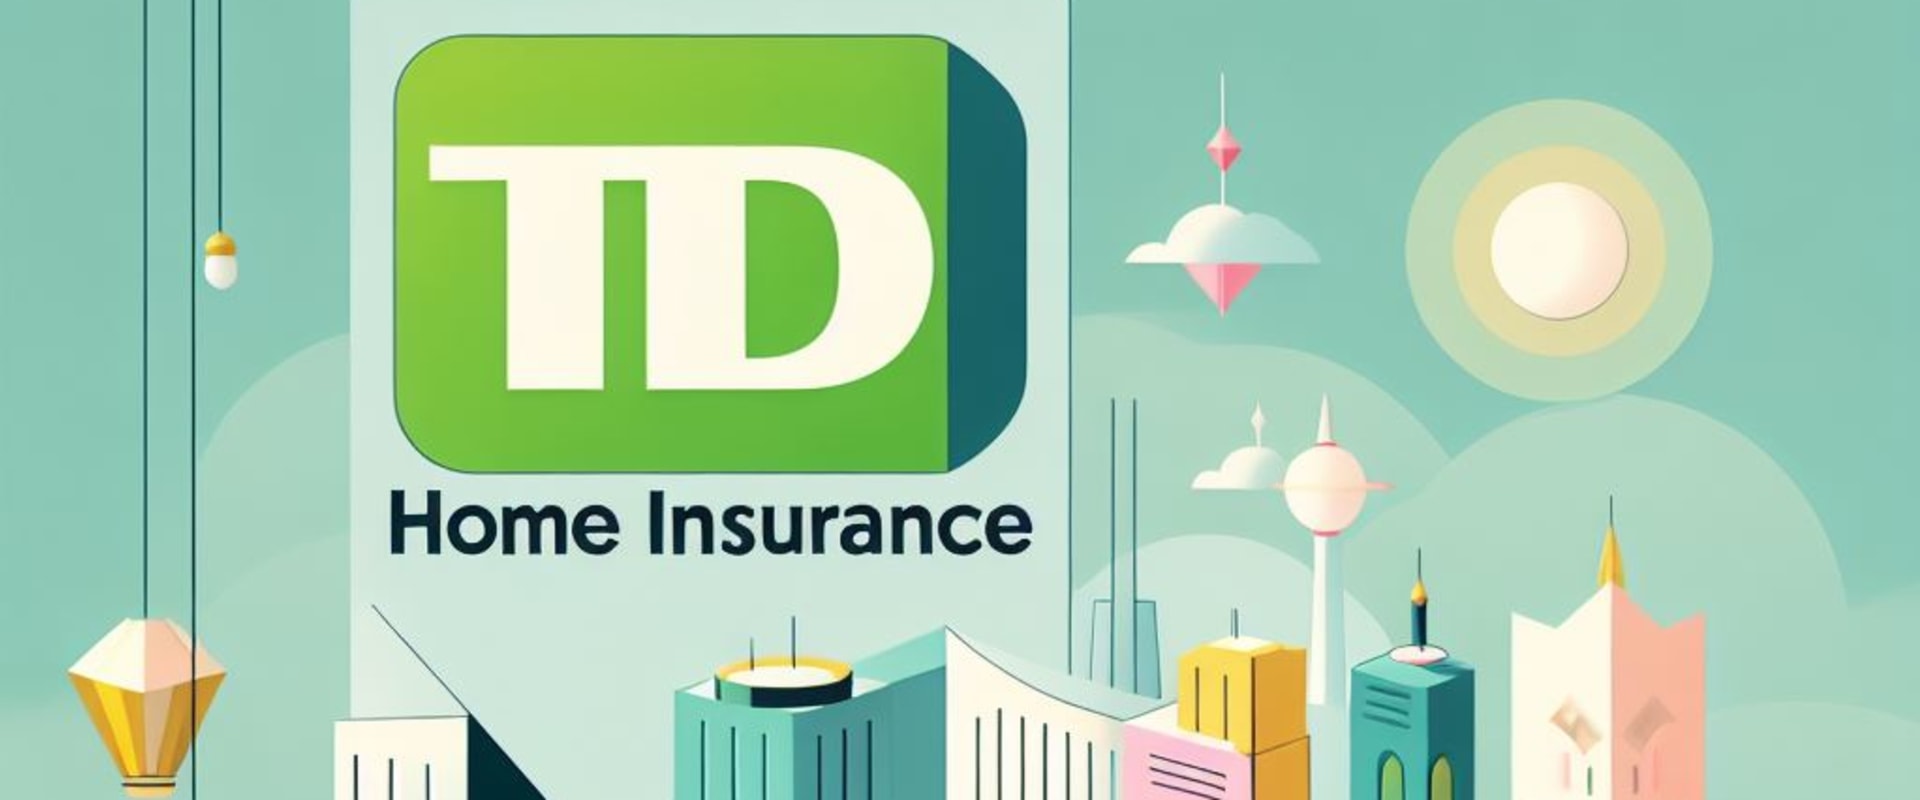 td home insurance a comprehensive guide